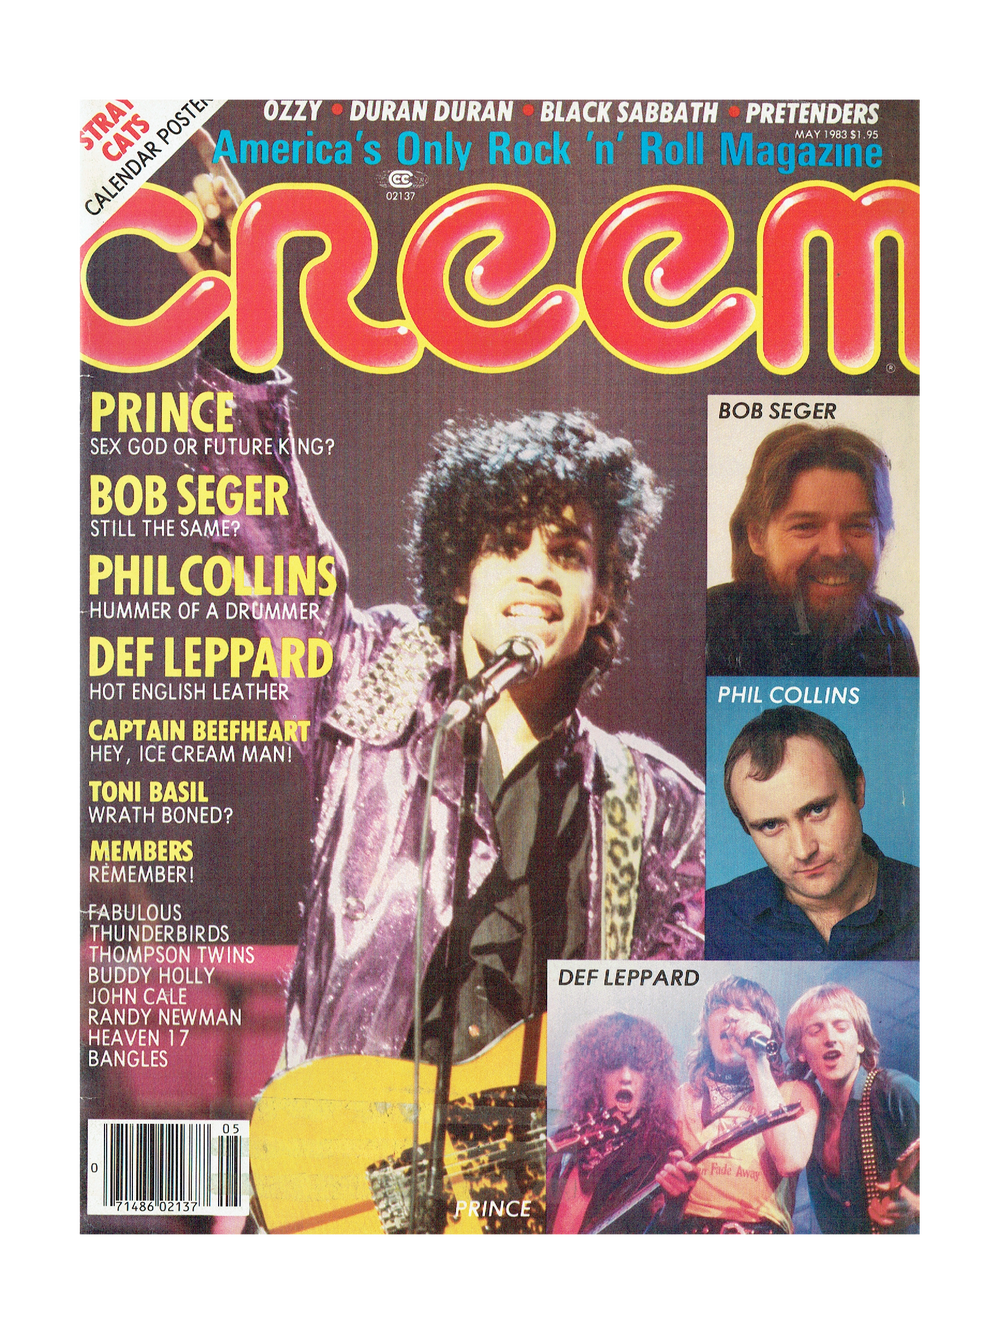 Prince – Cream Magazine May 1983 Prince Cover & 3 Page Article